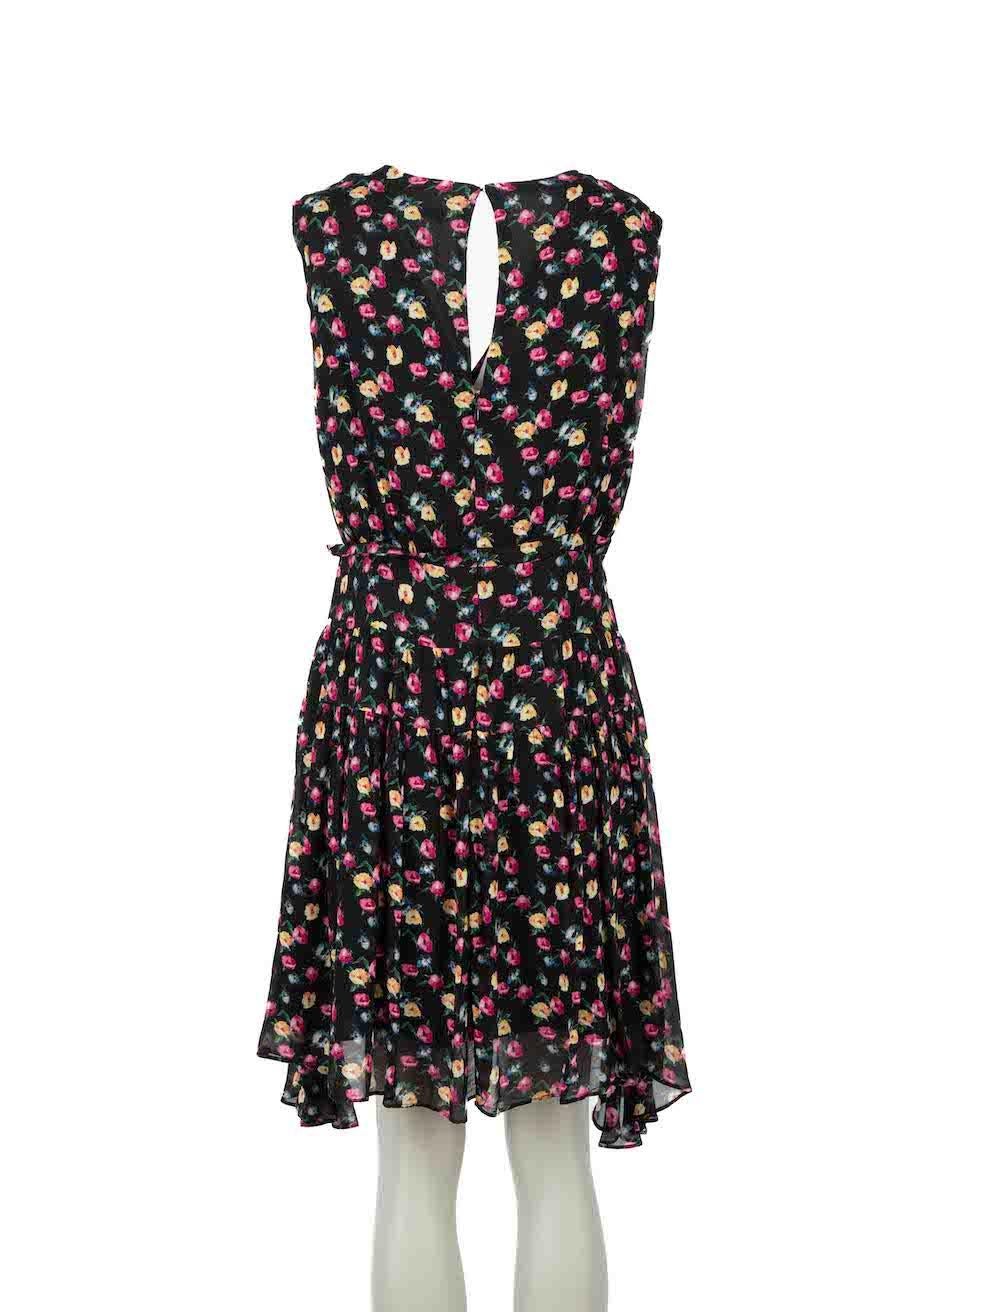 All Saints Black Floral Print Sleeveless Dress Size M In Good Condition For Sale In London, GB